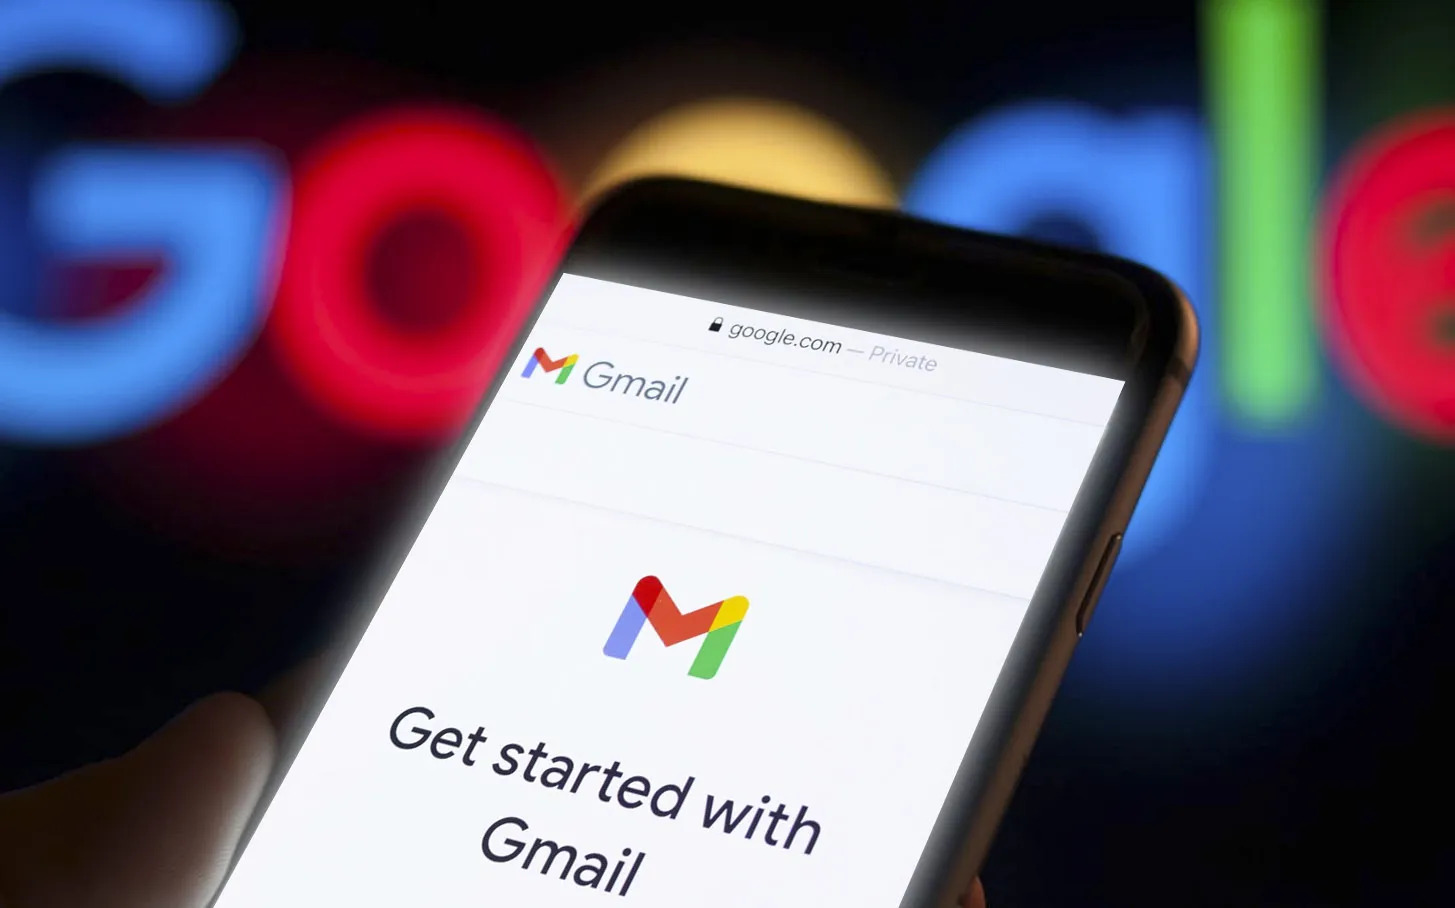 How To Use Gmail: Get Started With Your New Account